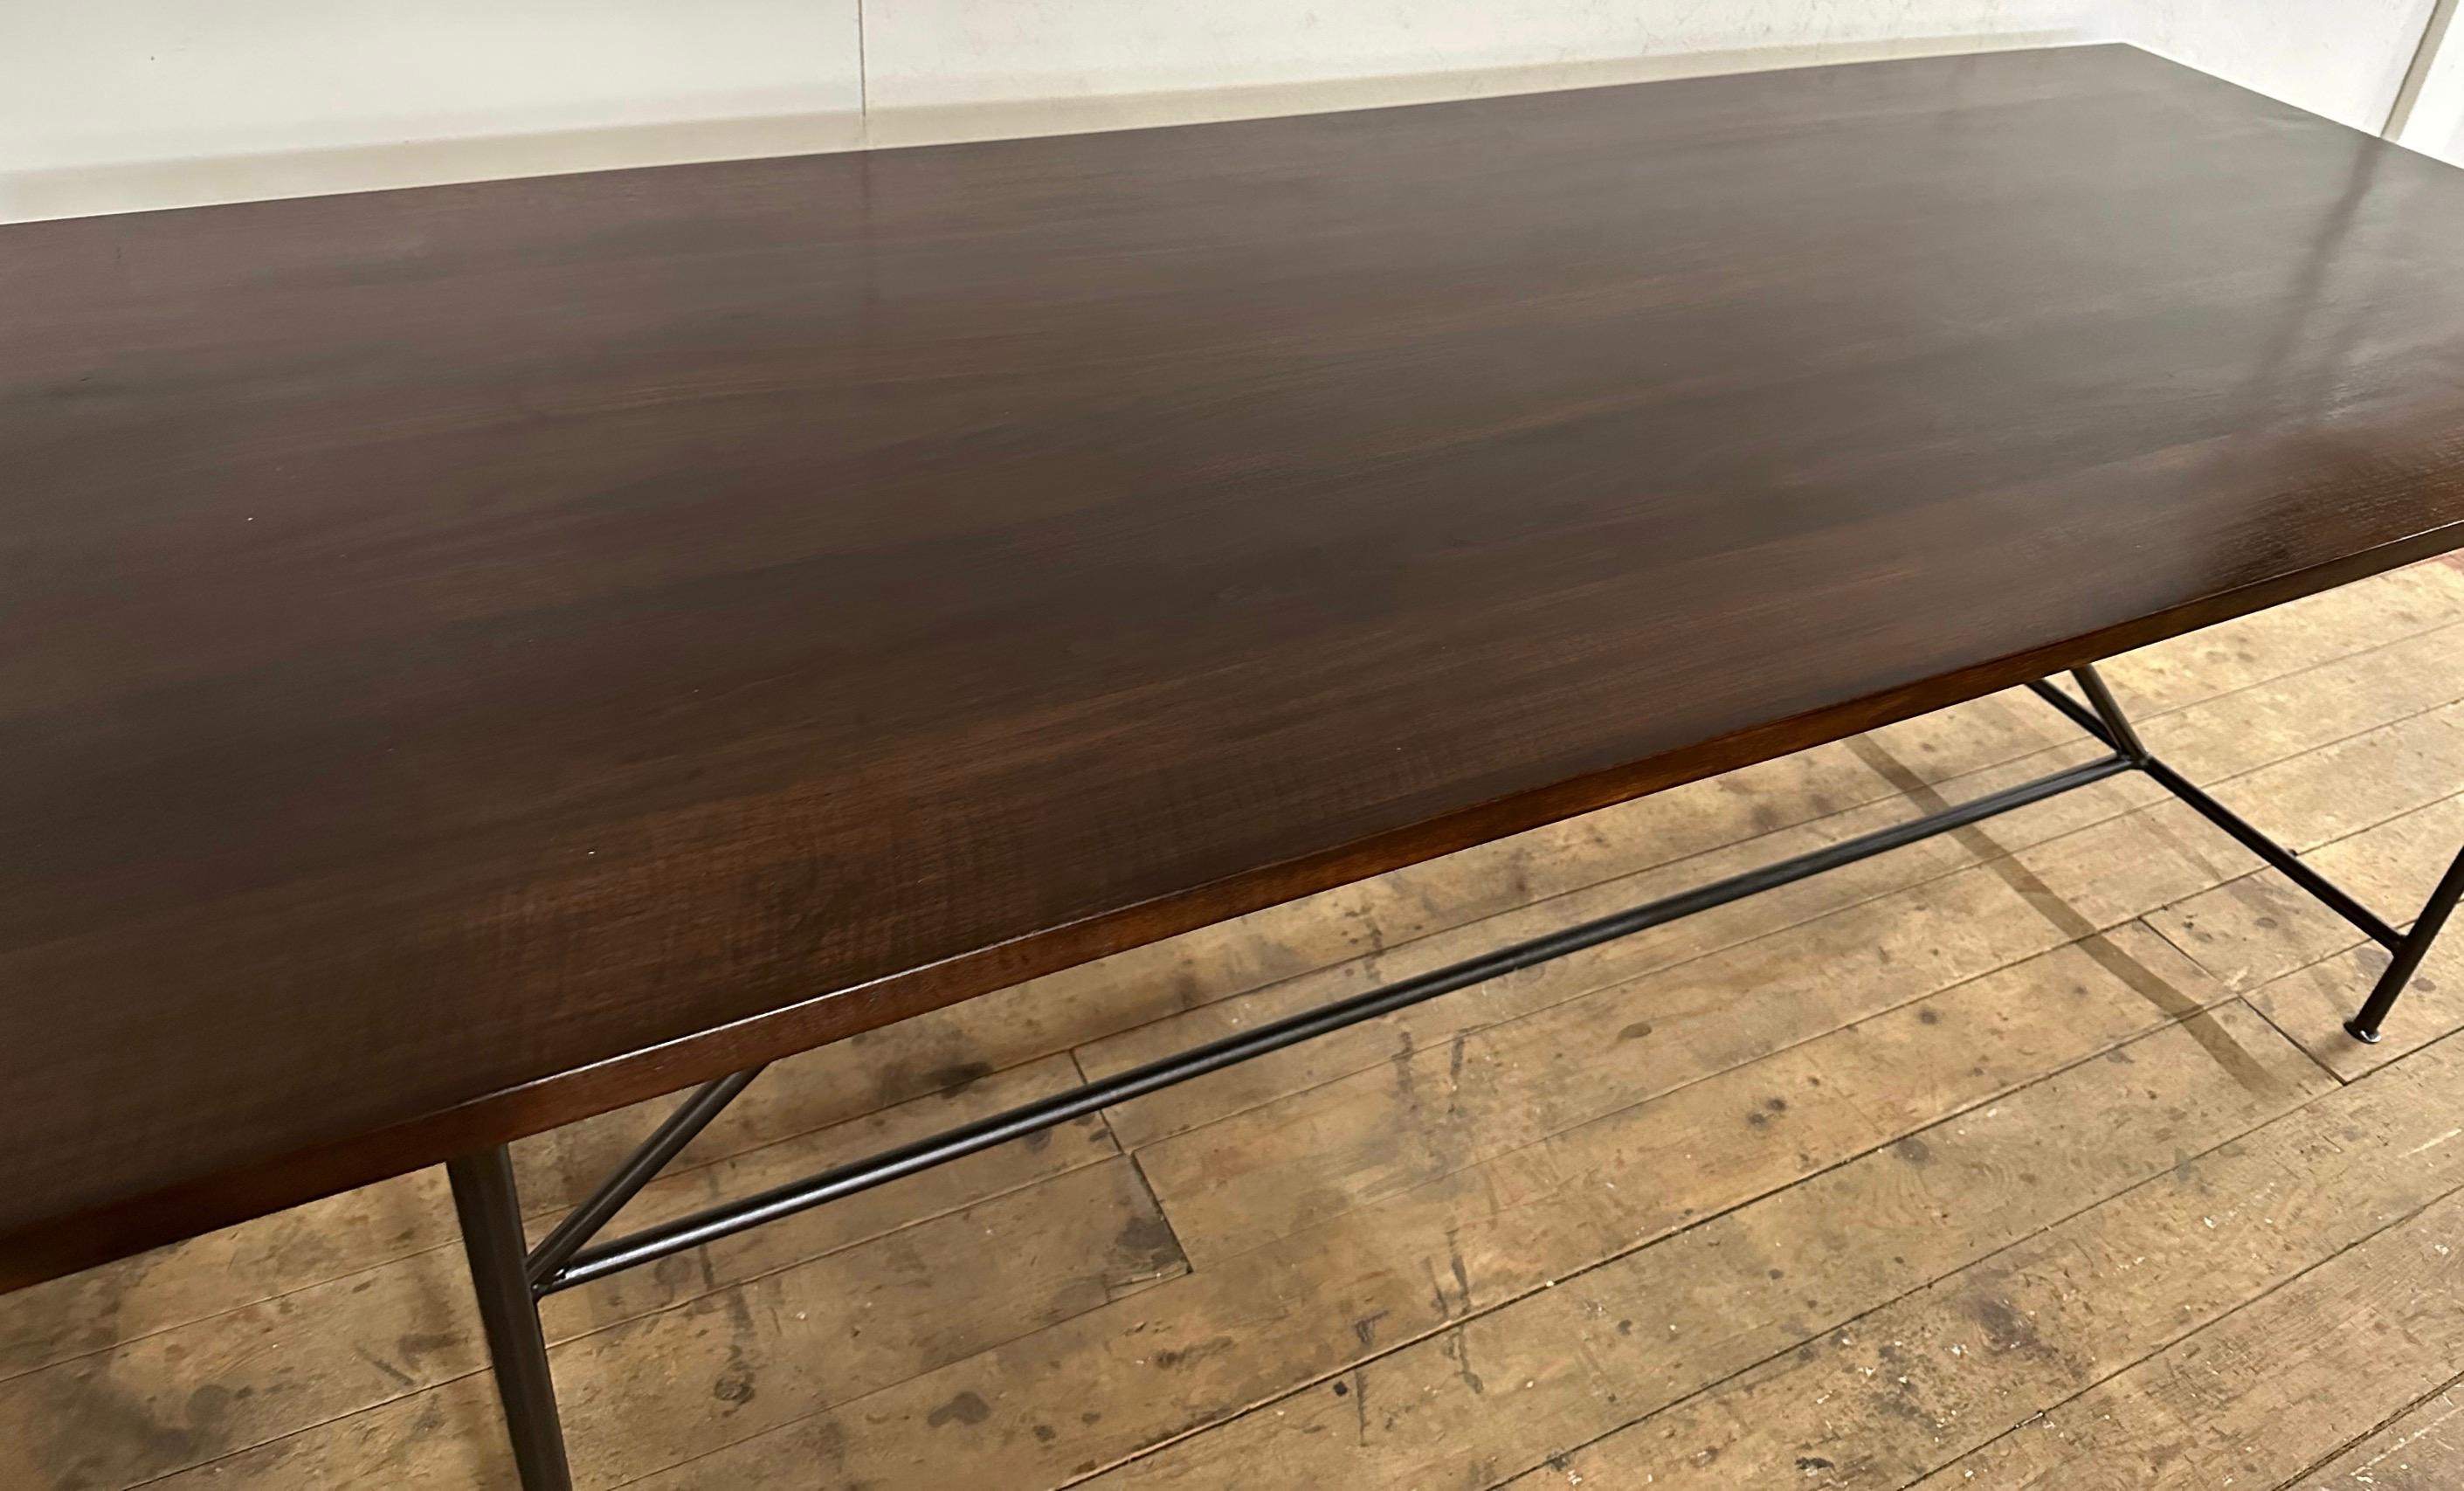 Elegant and rustic at the same time, this wrought iron dining table base with walnut top can be used a dining table, a desk, or a conference room table.
Search terms: Classical, neoclassical style, Industrial style, Minimalist
desk, conference